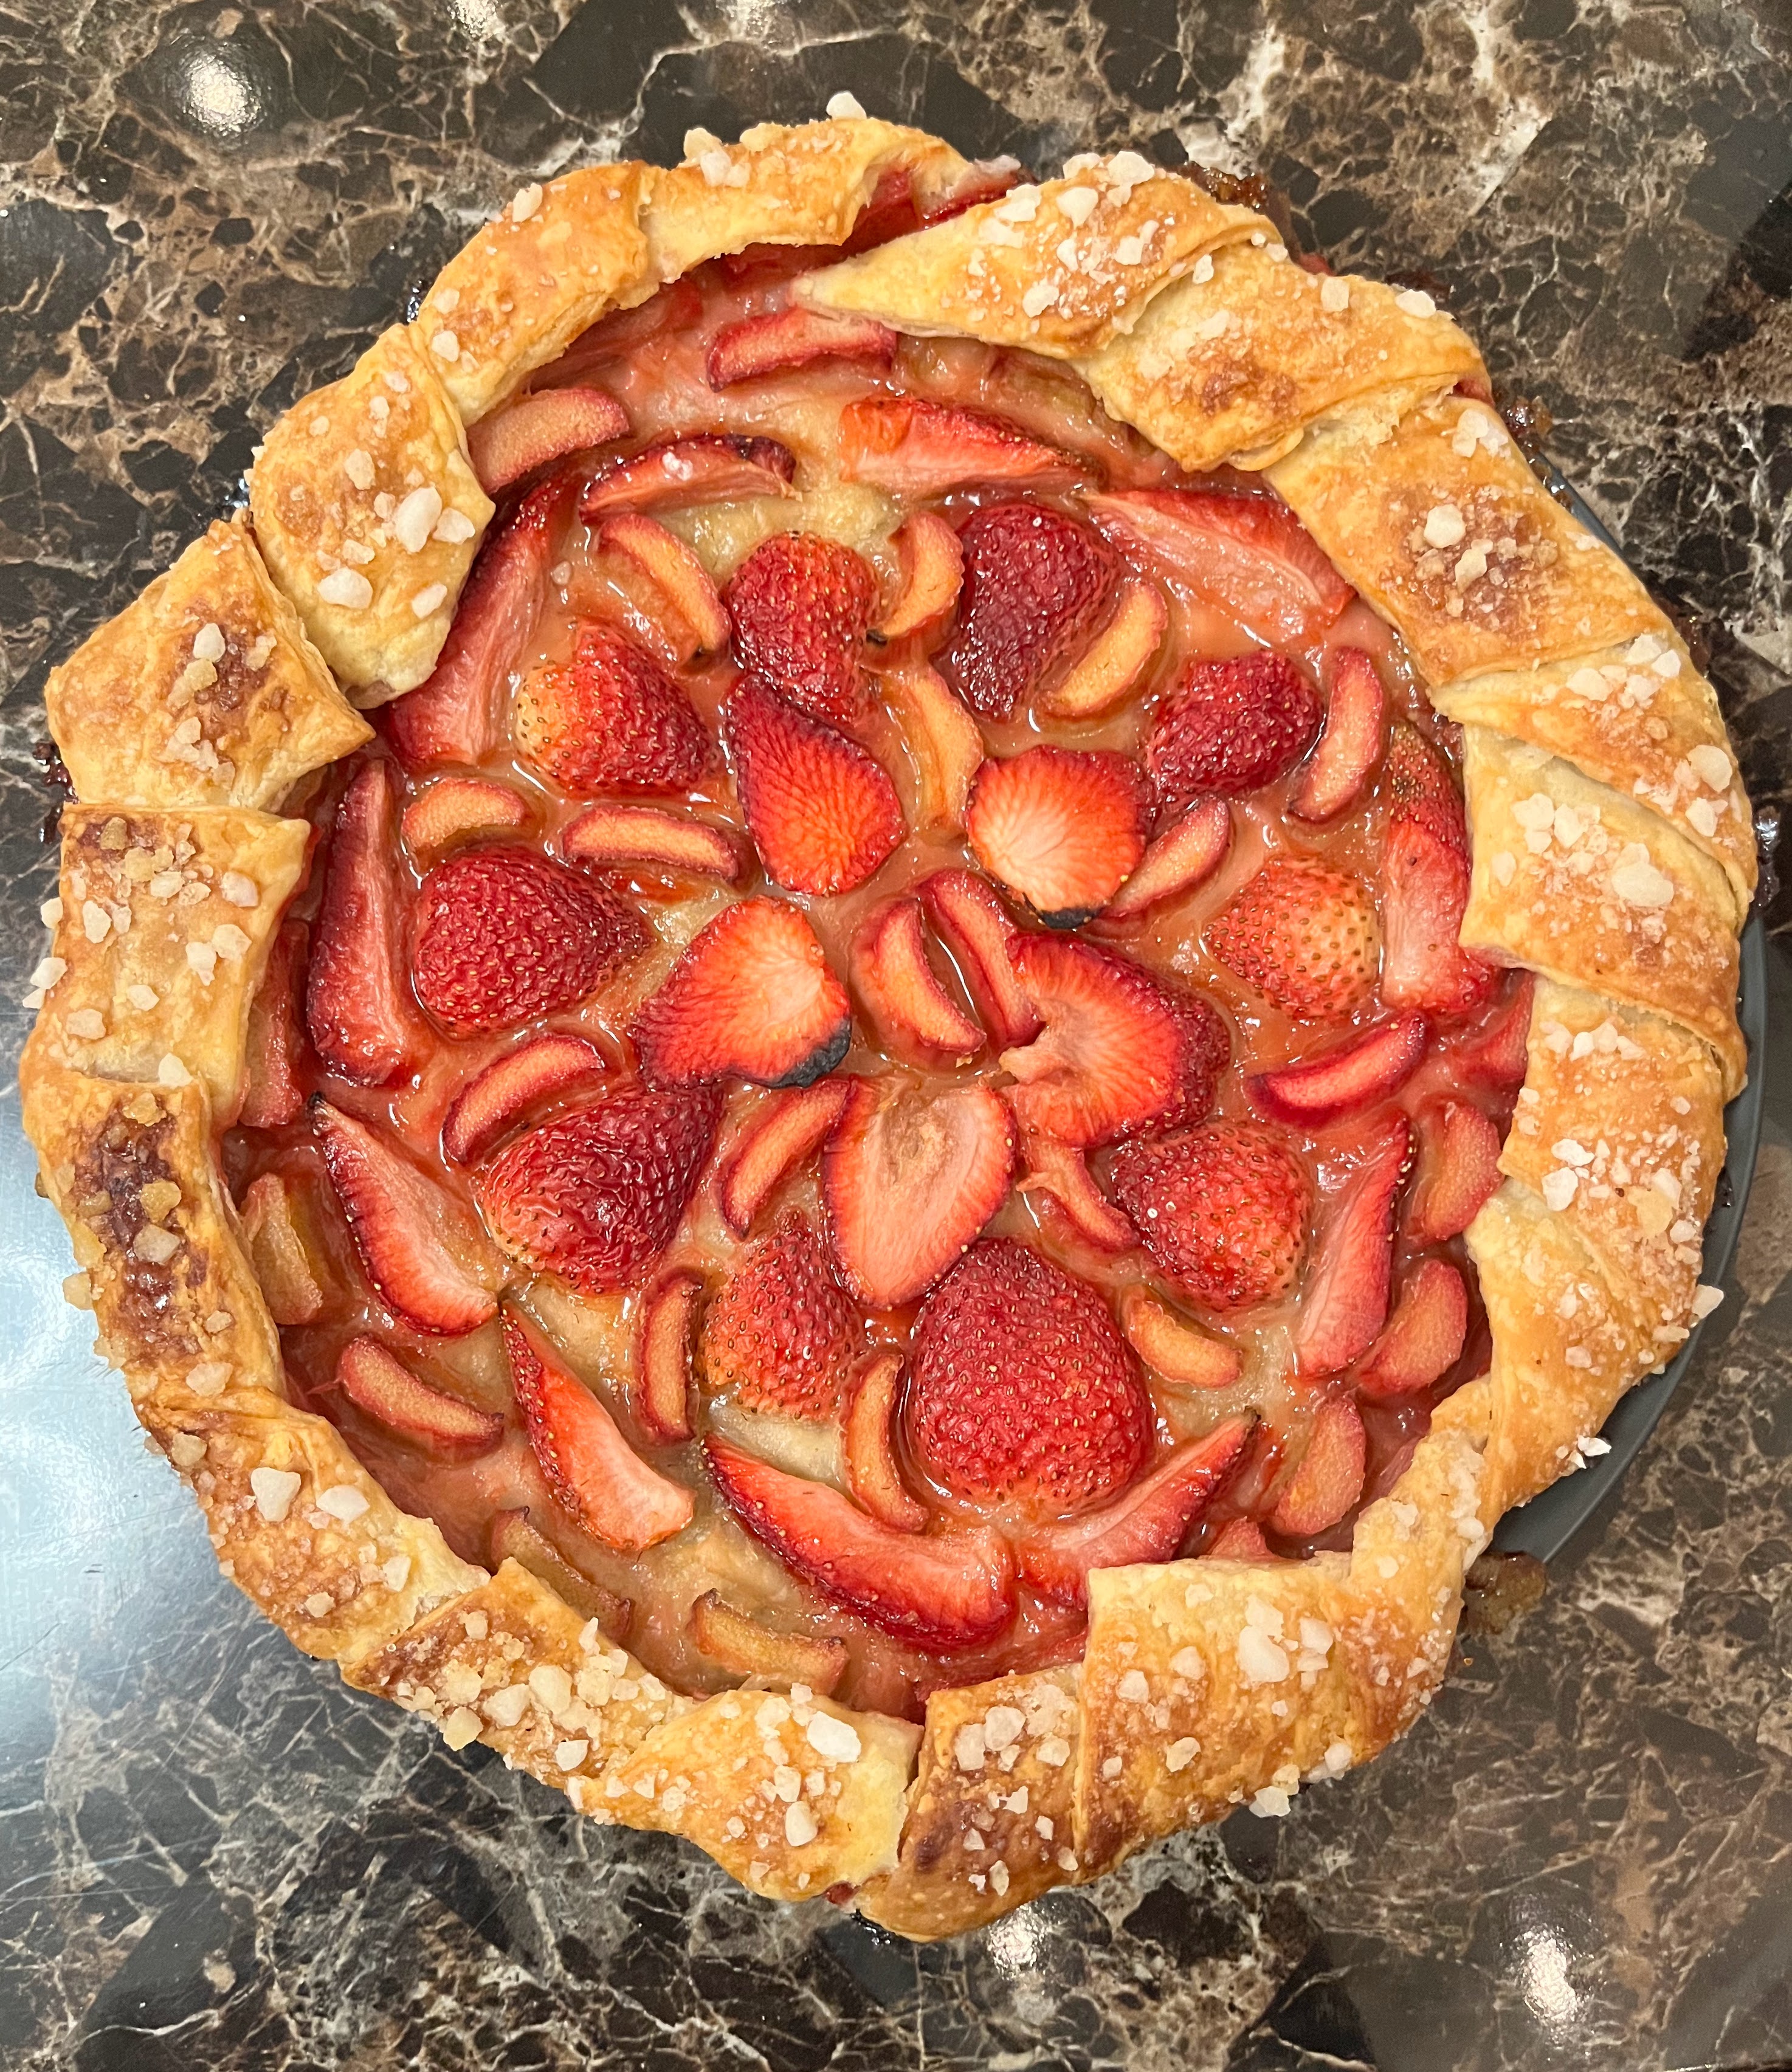 Strawberry-rhubarb galette topped with pearl sugar.